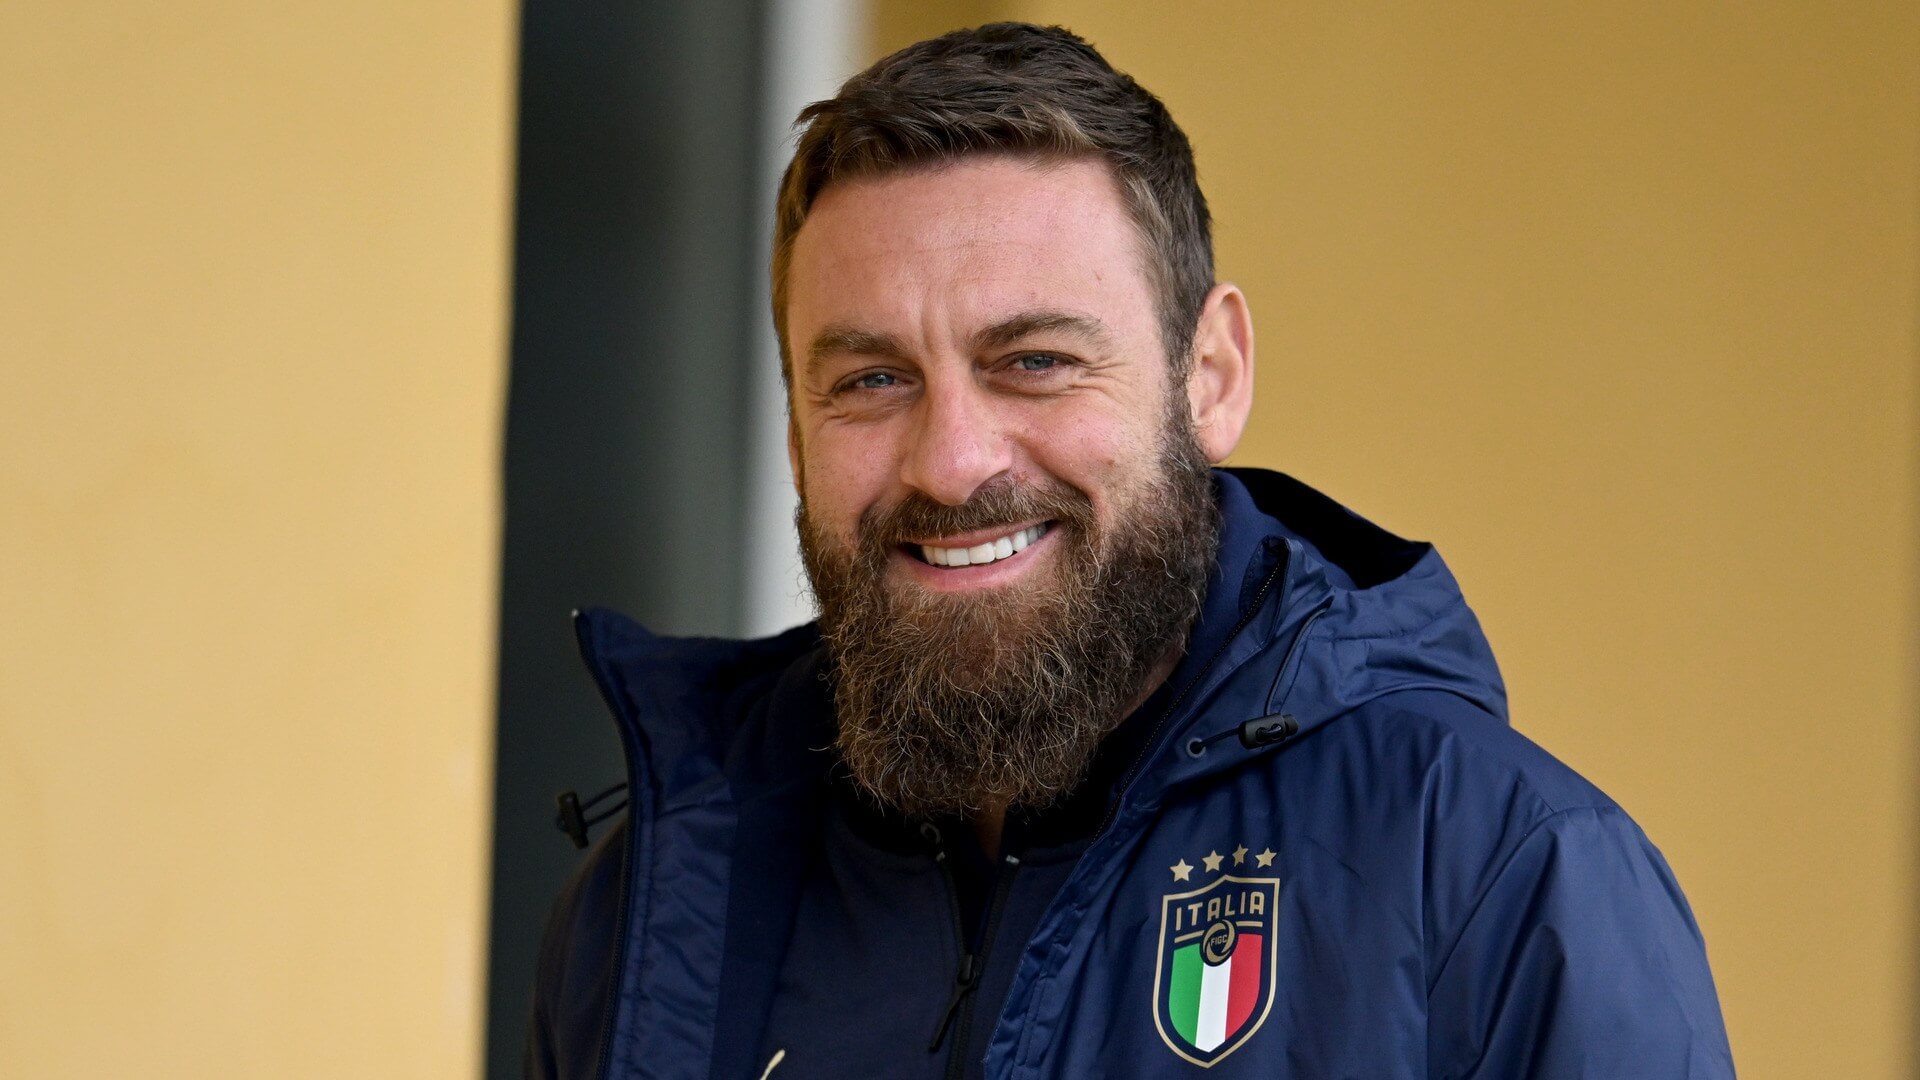 13-astonishing-facts-about-daniele-de-rossi